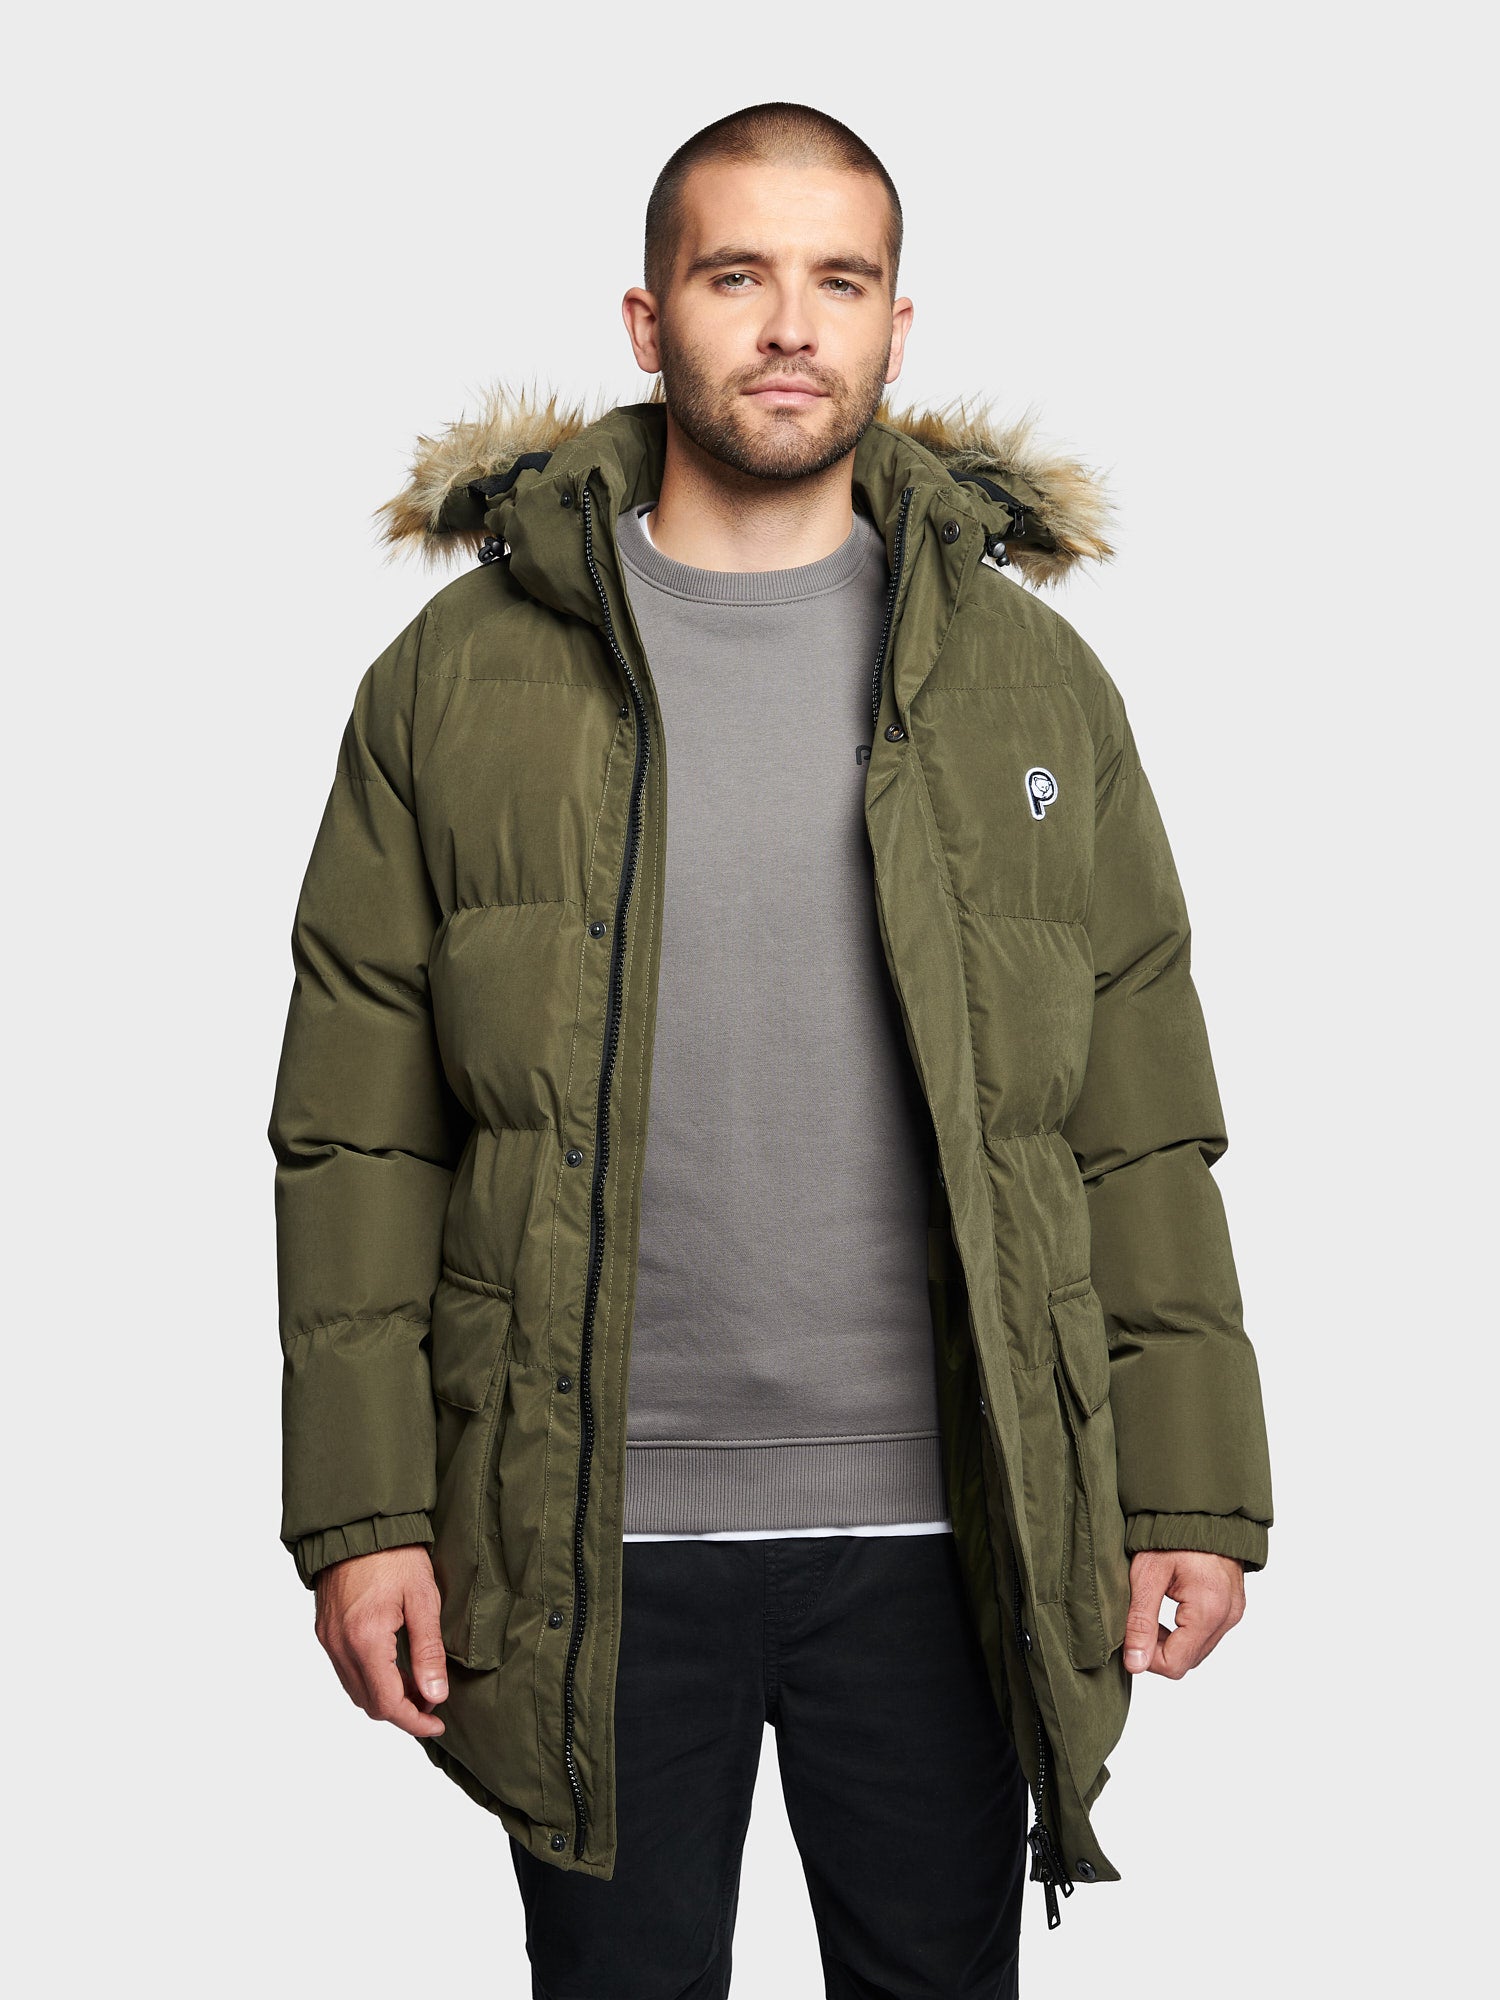 P Bear Puffer Jacket in Forest Night